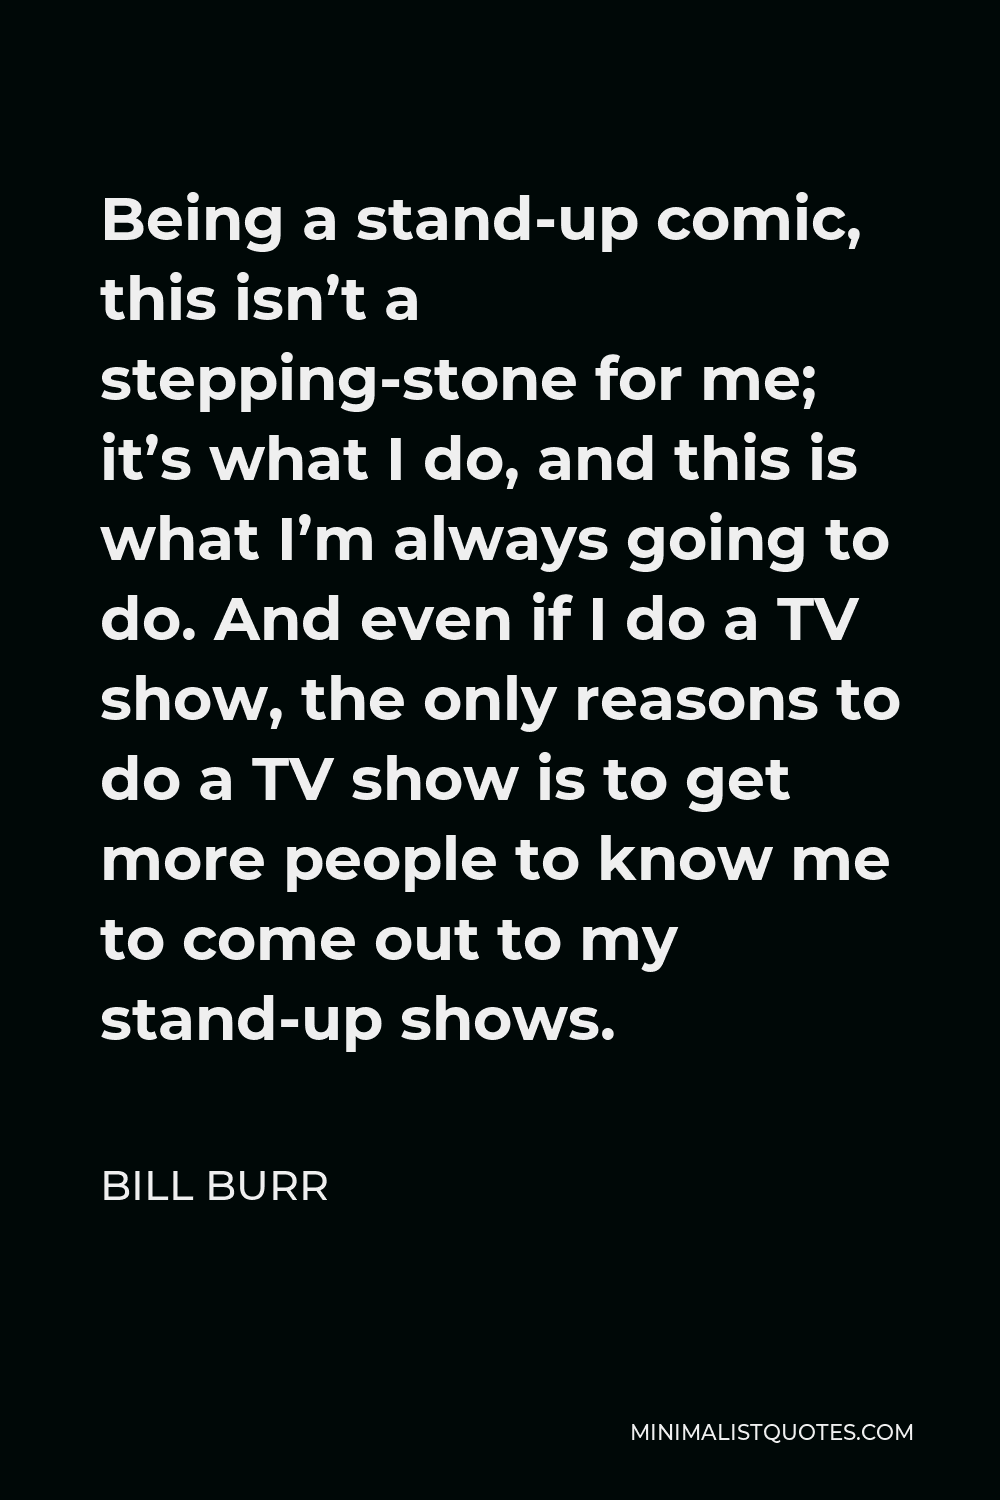 Bill Burr Quote - Being a stand-up comic, this isn’t a stepping-stone for me; it’s what I do, and this is what I’m always going to do. And even if I do a TV show, the only reasons to do a TV show is to get more people to know me to come out to my stand-up shows.